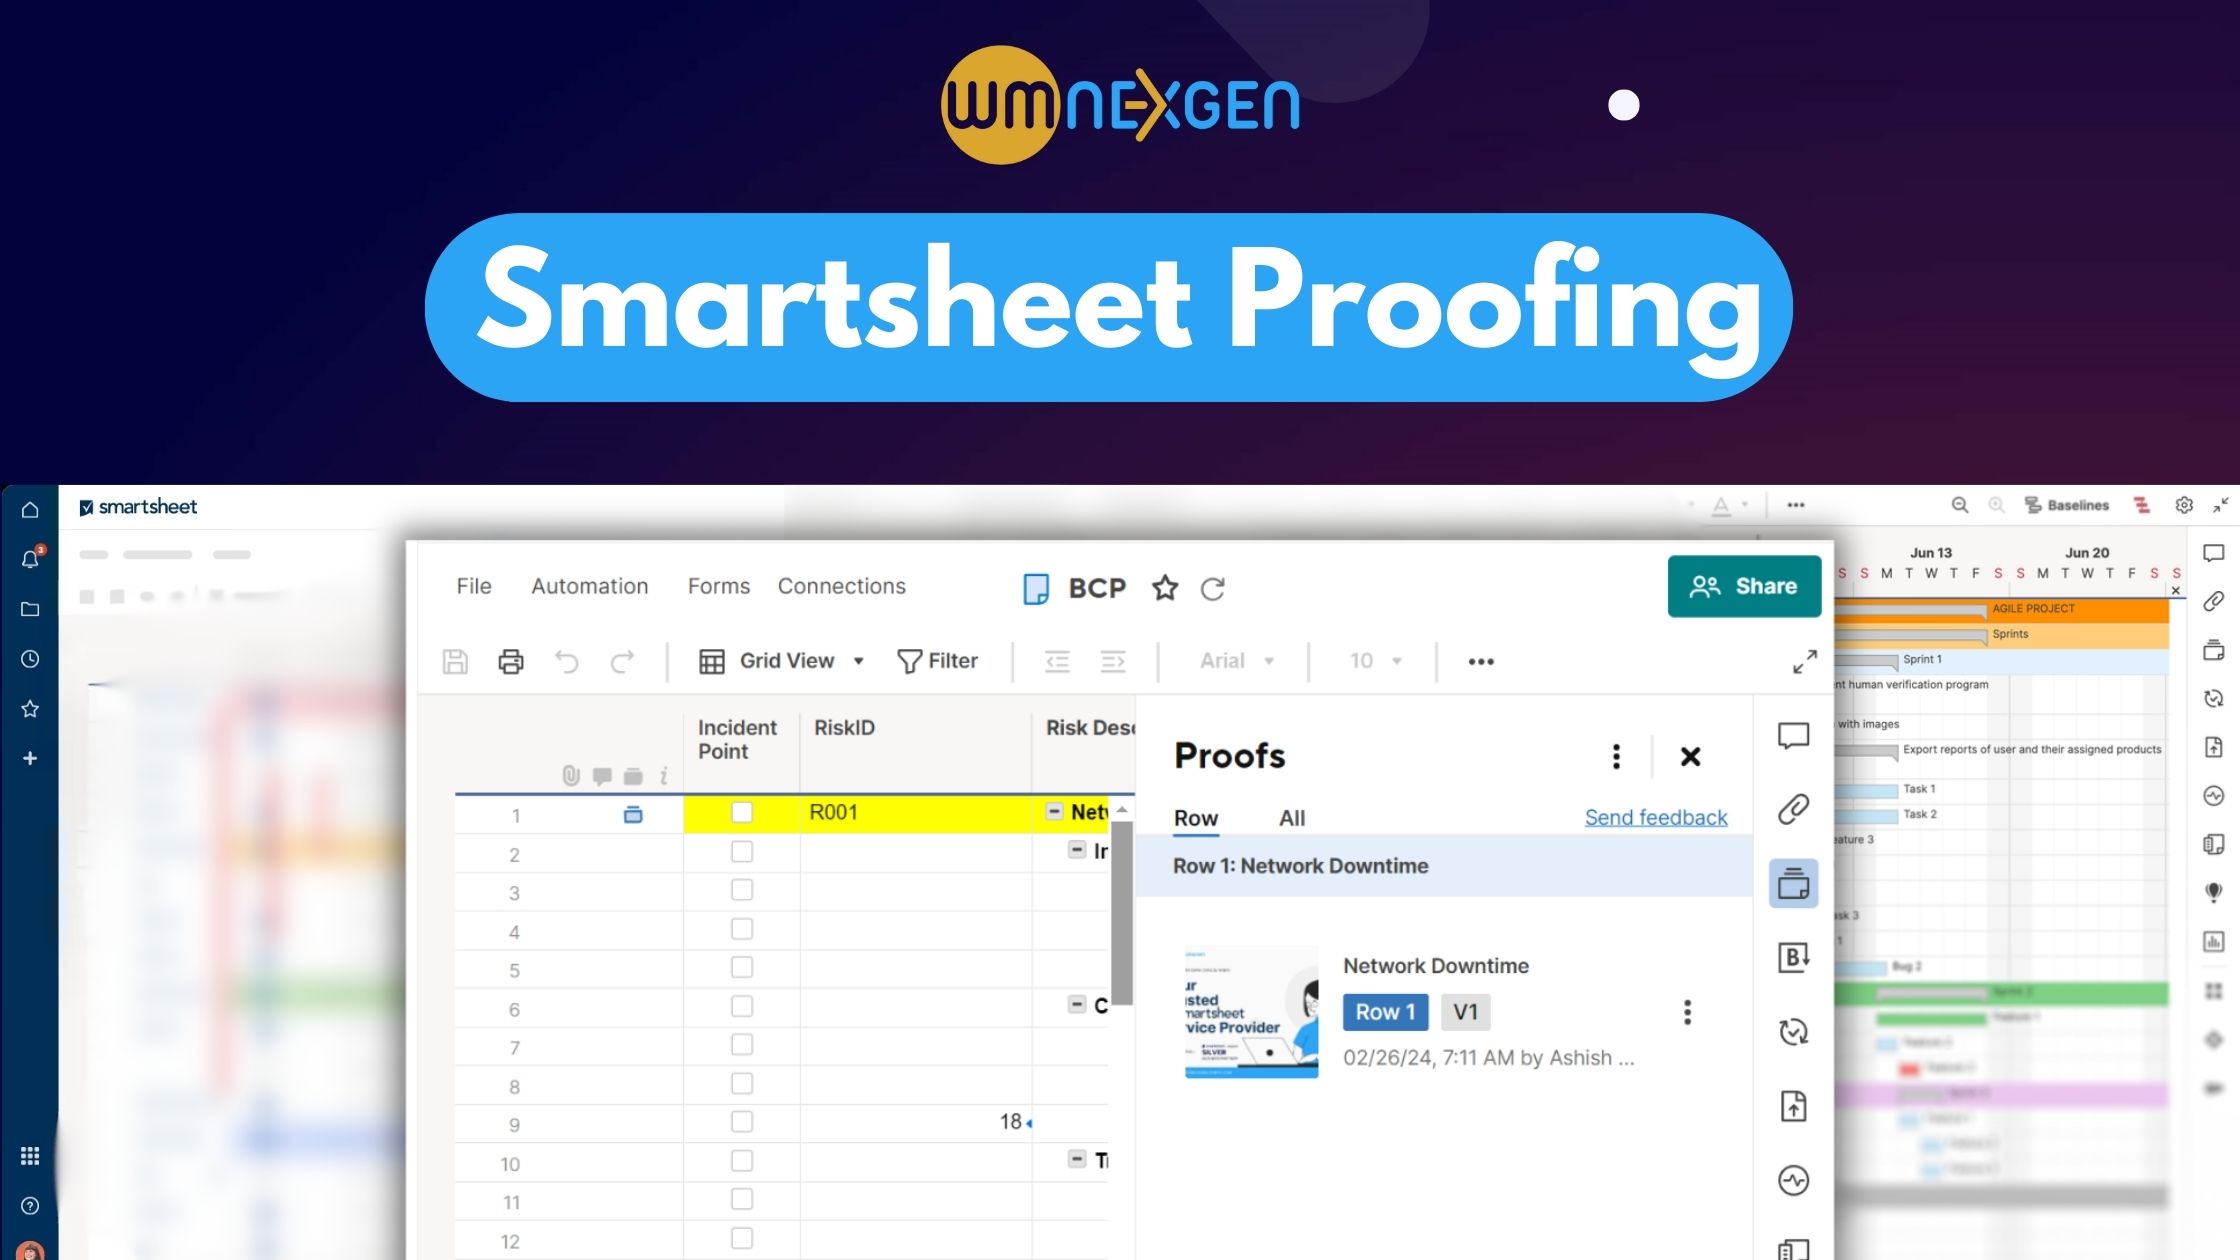 What Is a Smartsheet Proof and Why Does It Matter?